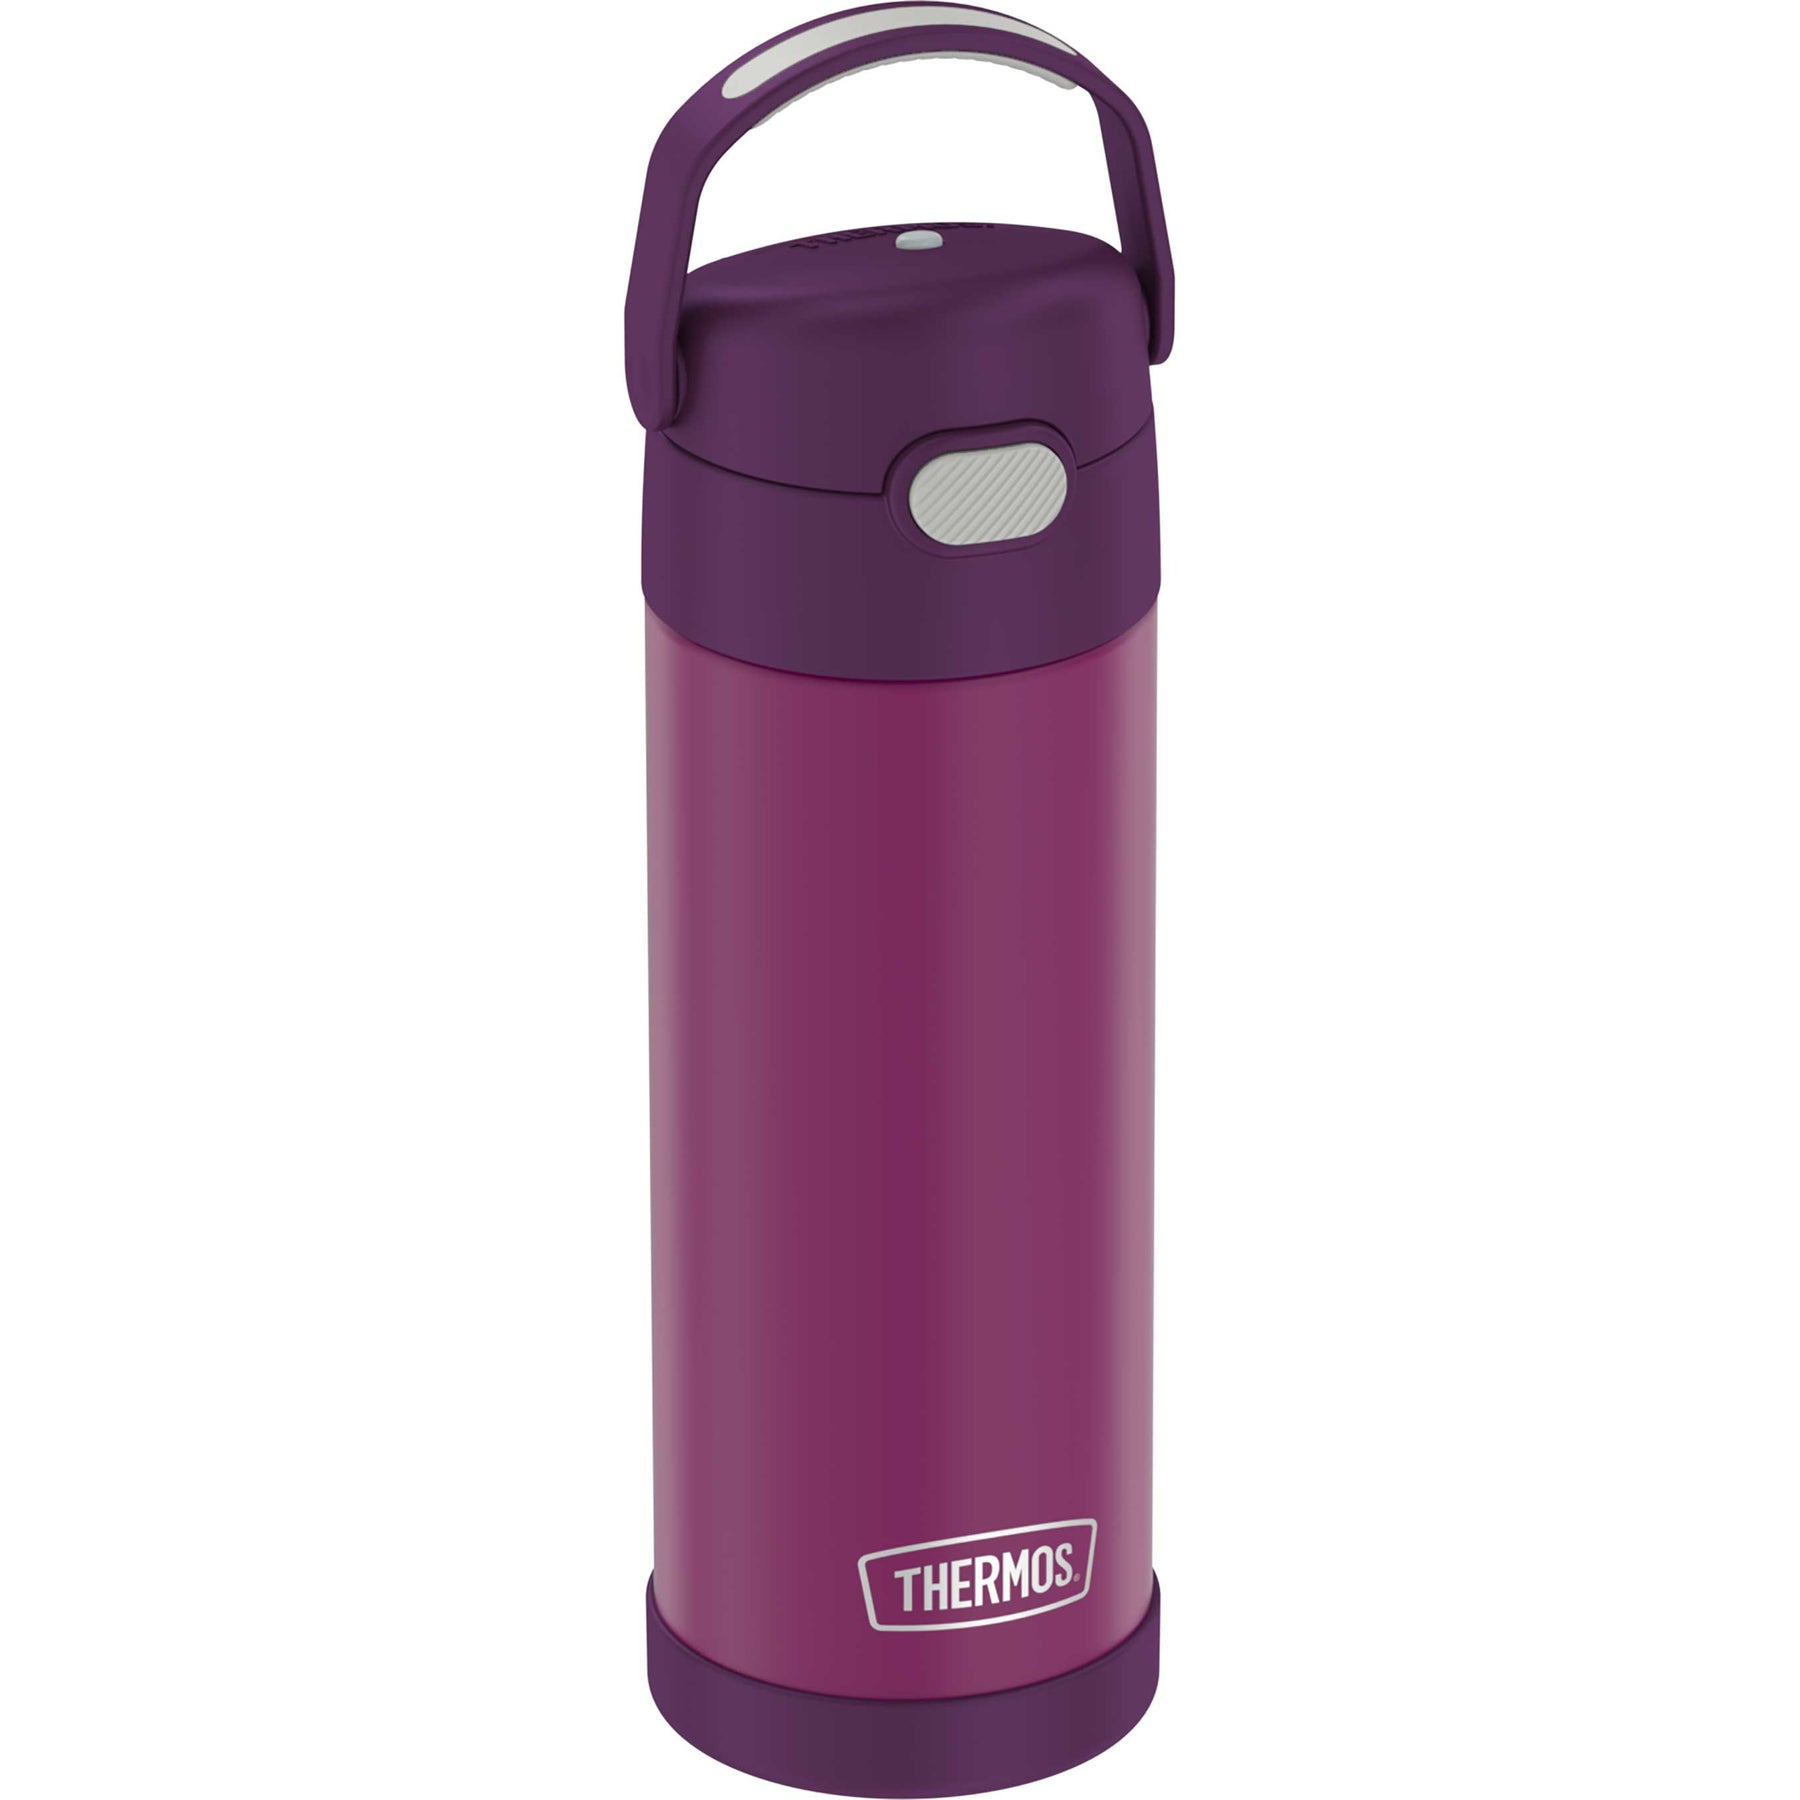 ThermoFlask Double Wall Vacuum Insulated Stainless Steel 2-Pack of Water  Bottles, 16 Ounce, Purple/Orange